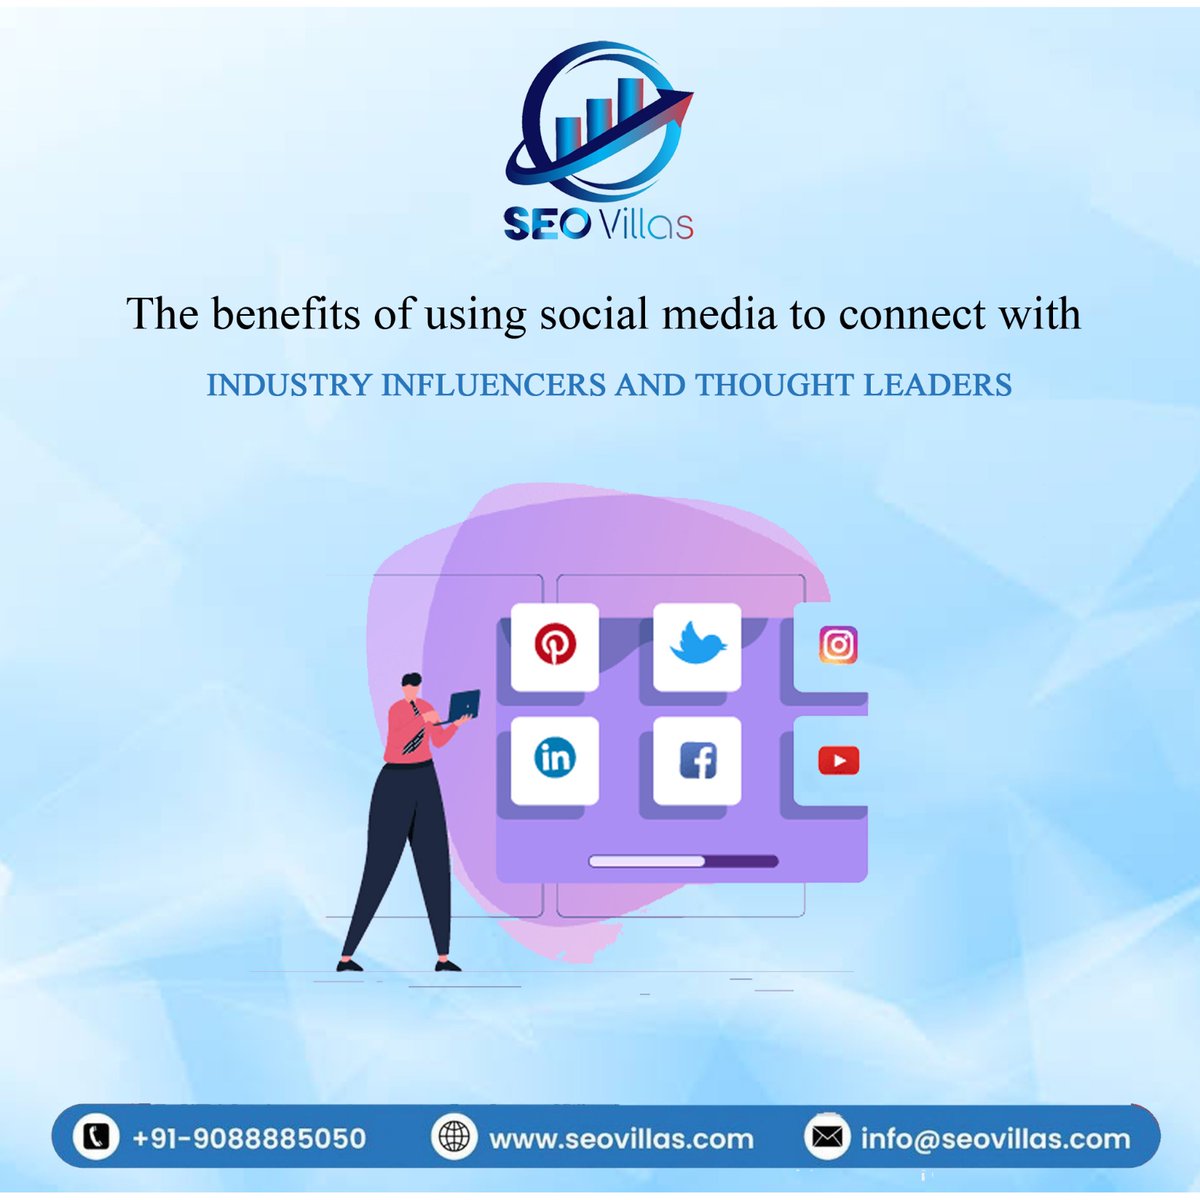 Social media is your gateway to industry leaders! Connect, learn from their insights, and expand your reach. seovillas.com/services/socia… #networking #socialmedia #industryleaders